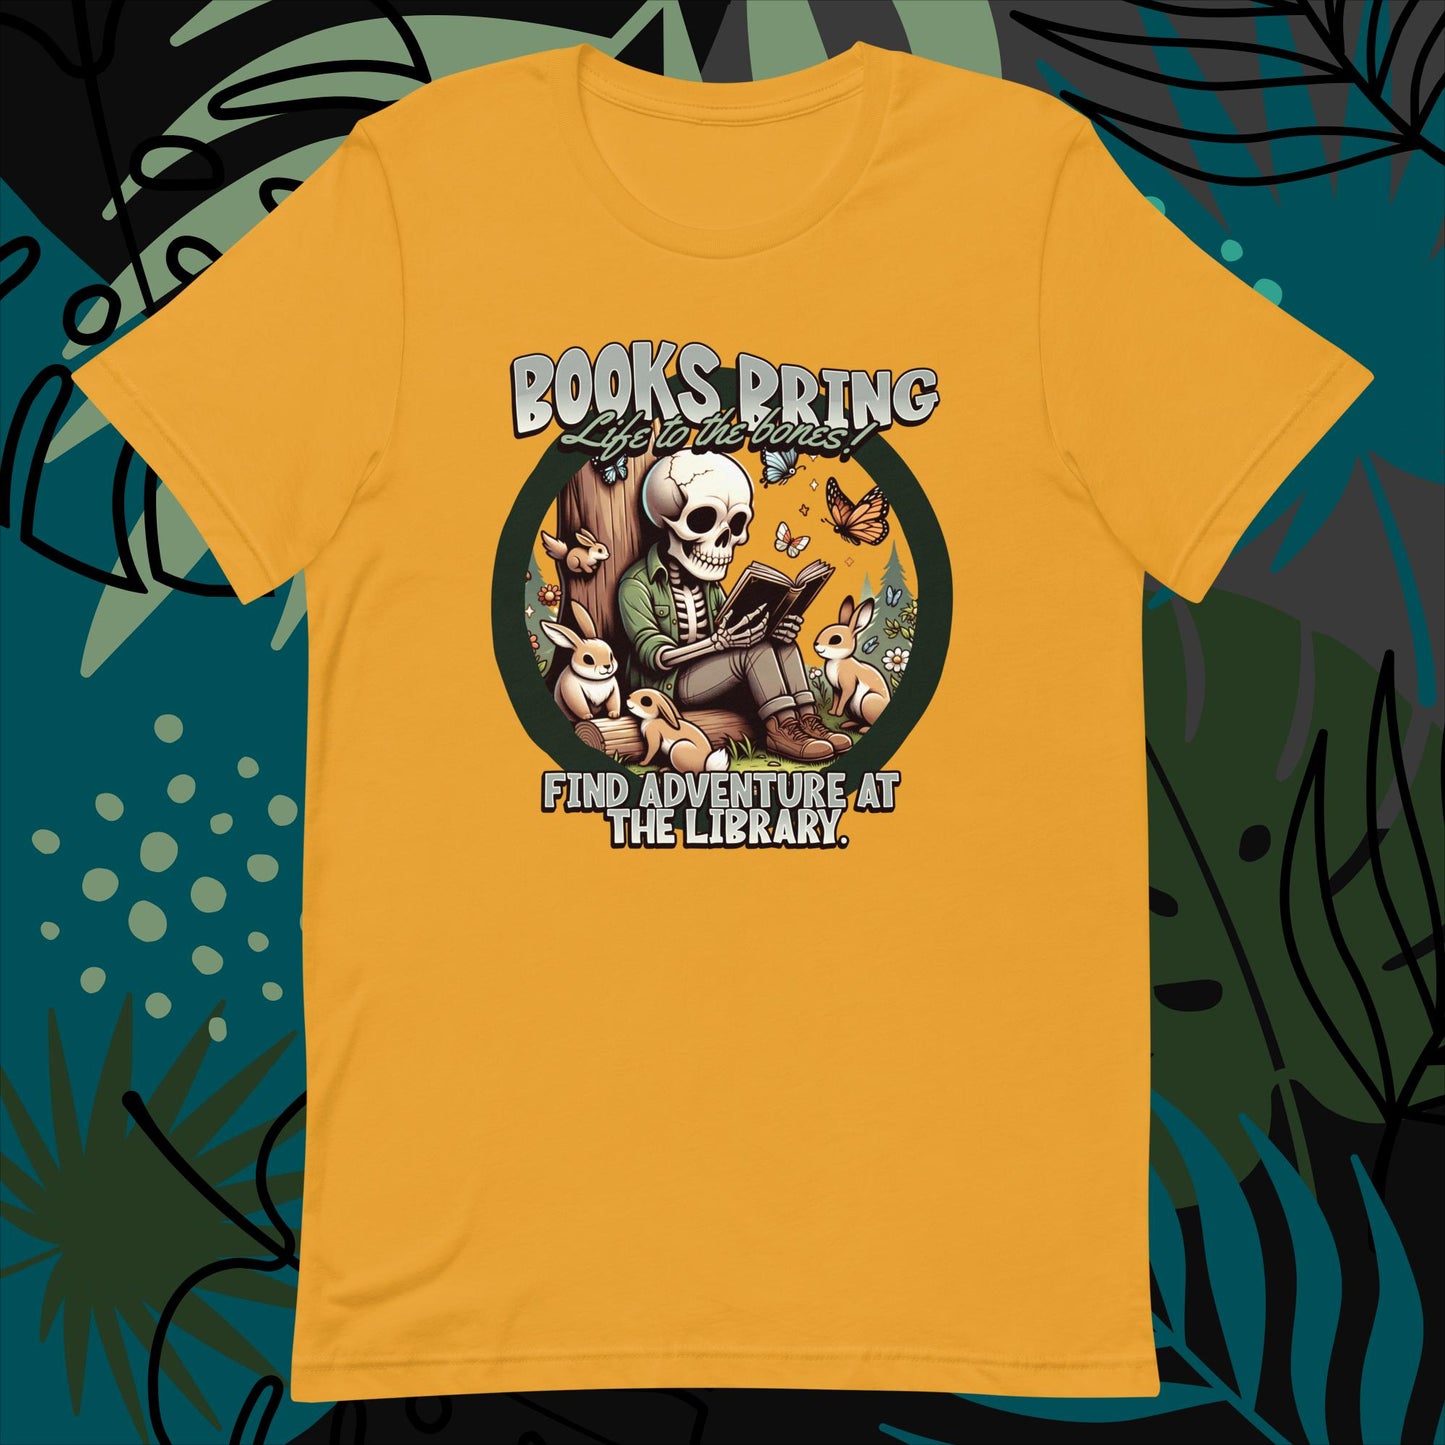 ADULT "Books Bring Life to Your Bones" Funny Skeleton Summer Reading Library T-Shirt Tshirt